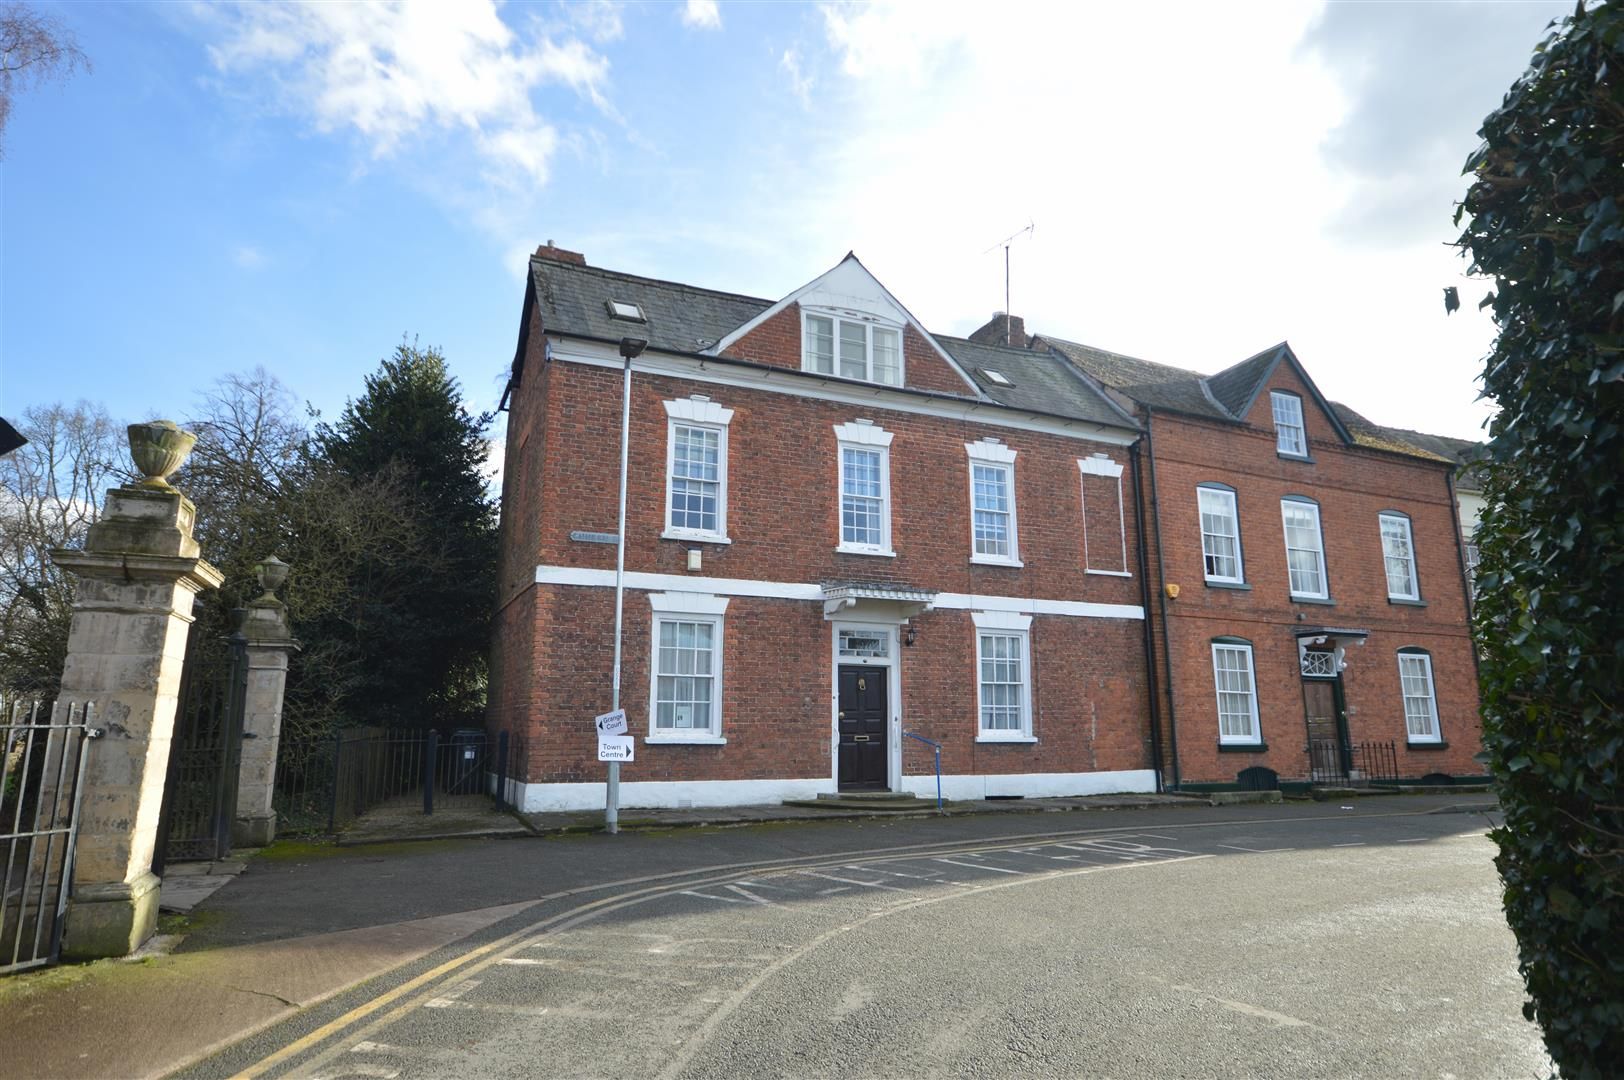 6 bed town house for sale in Leominster - Property Image 1